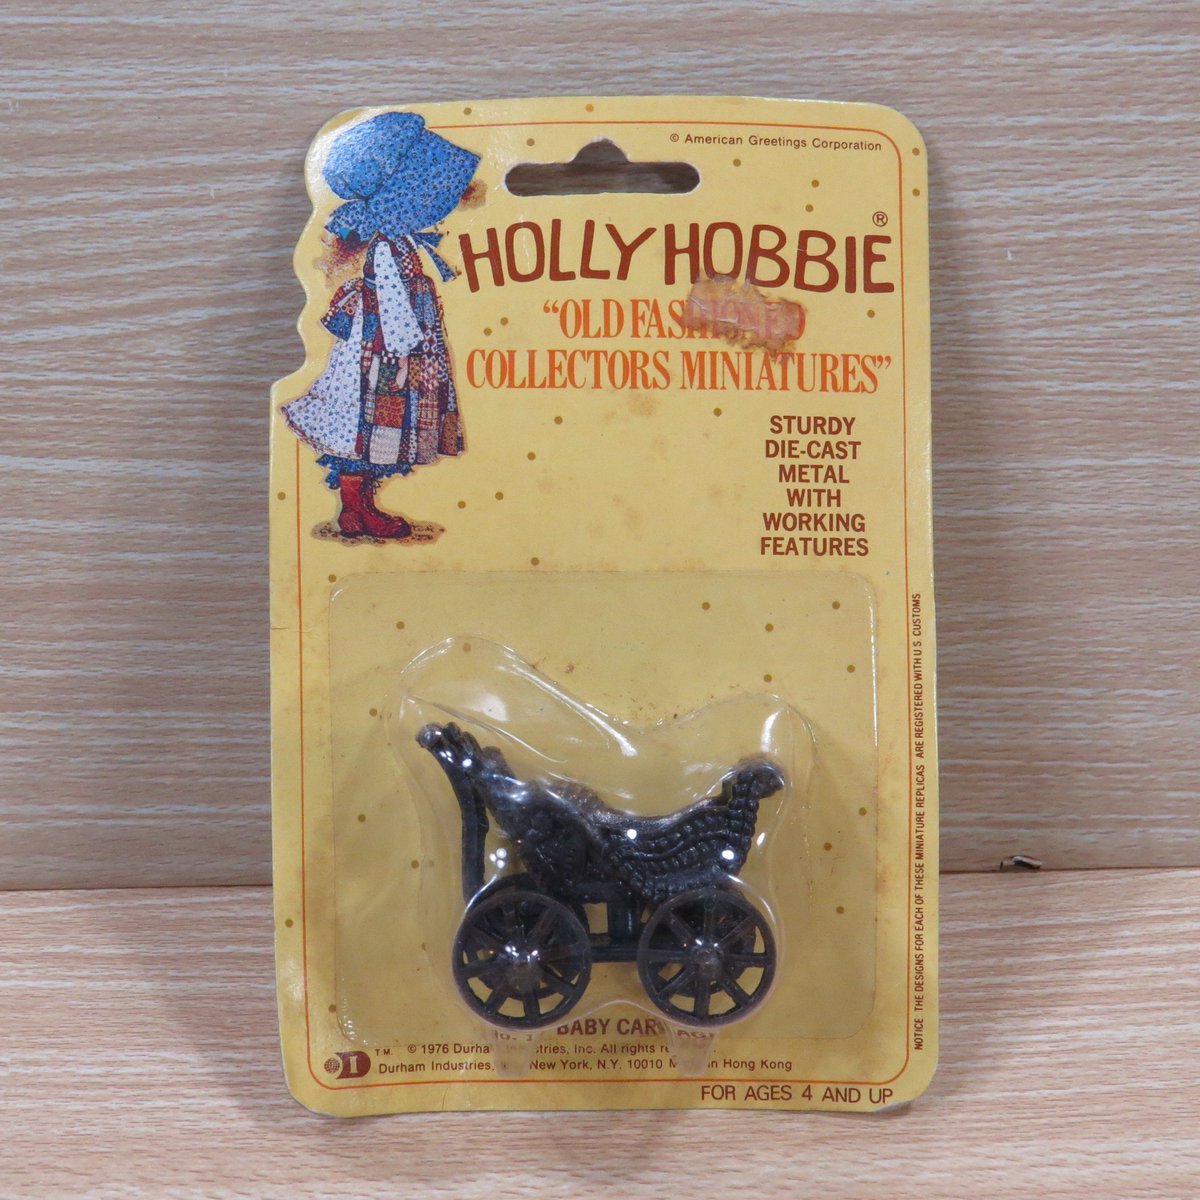 Vintage Holly Hobbie Die Cast Baby Carriage 1976 Durham Industries Old Fashioned Collectors Miniatures - New Old Stock etsy.me/403KUN5 #miniature #1970s #diecast #durhamindustries #vintageminiature #shadowbox #hollyhobbie #babycarriage #etsy #1970s